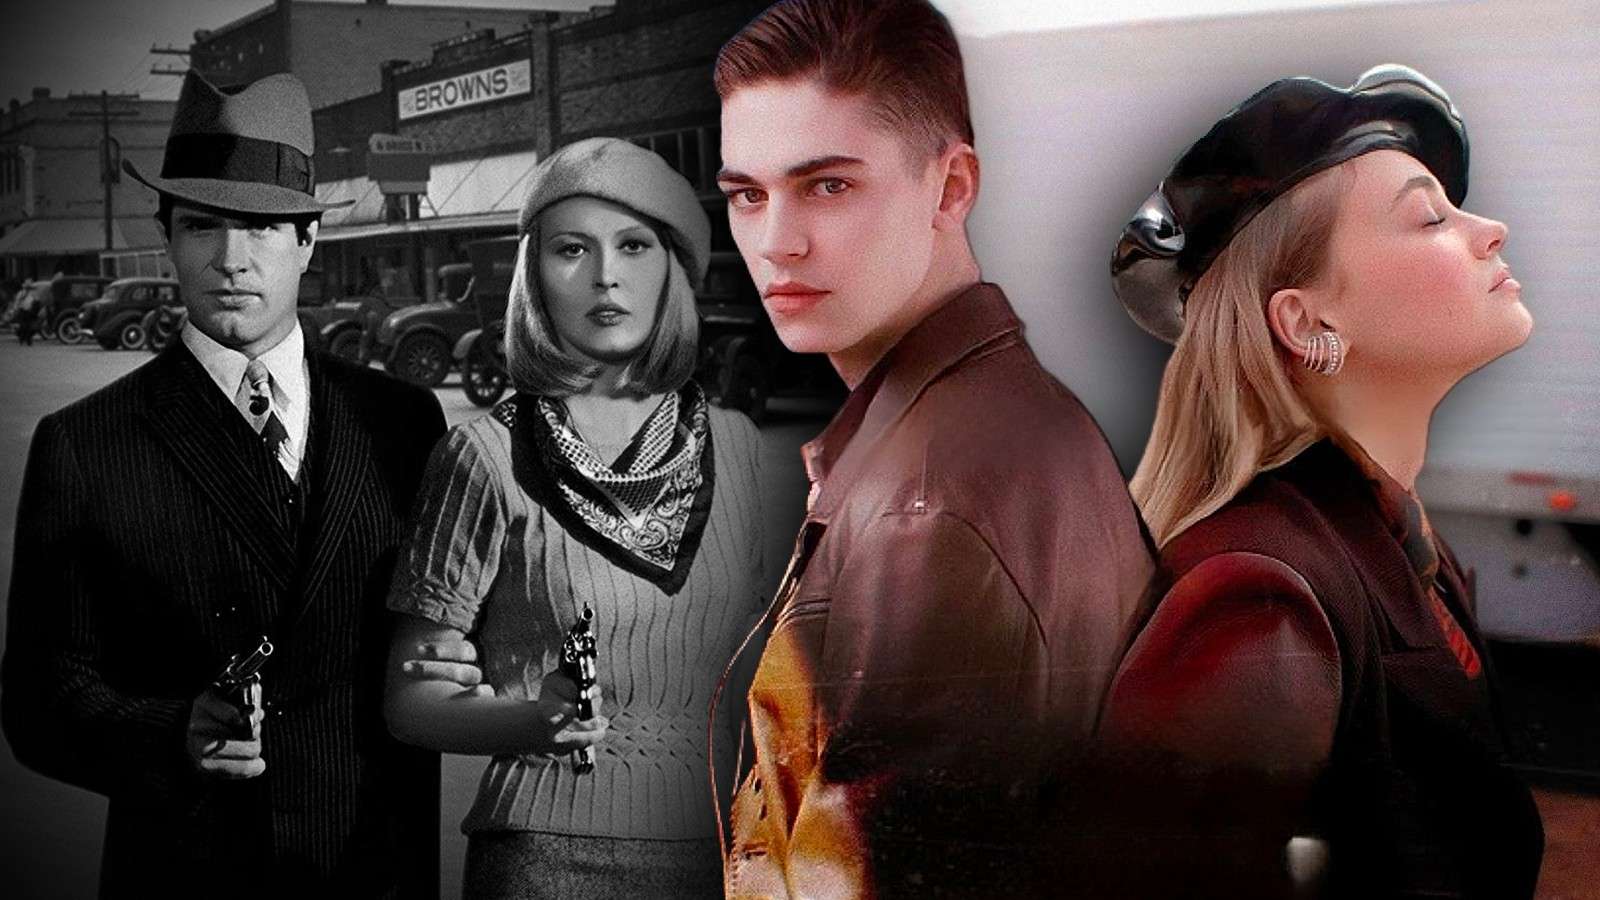 Warren Beatty, Faye Dunaway, Hero Fiennes Tiffin and Josephine Langford as Bonnie and Clyde